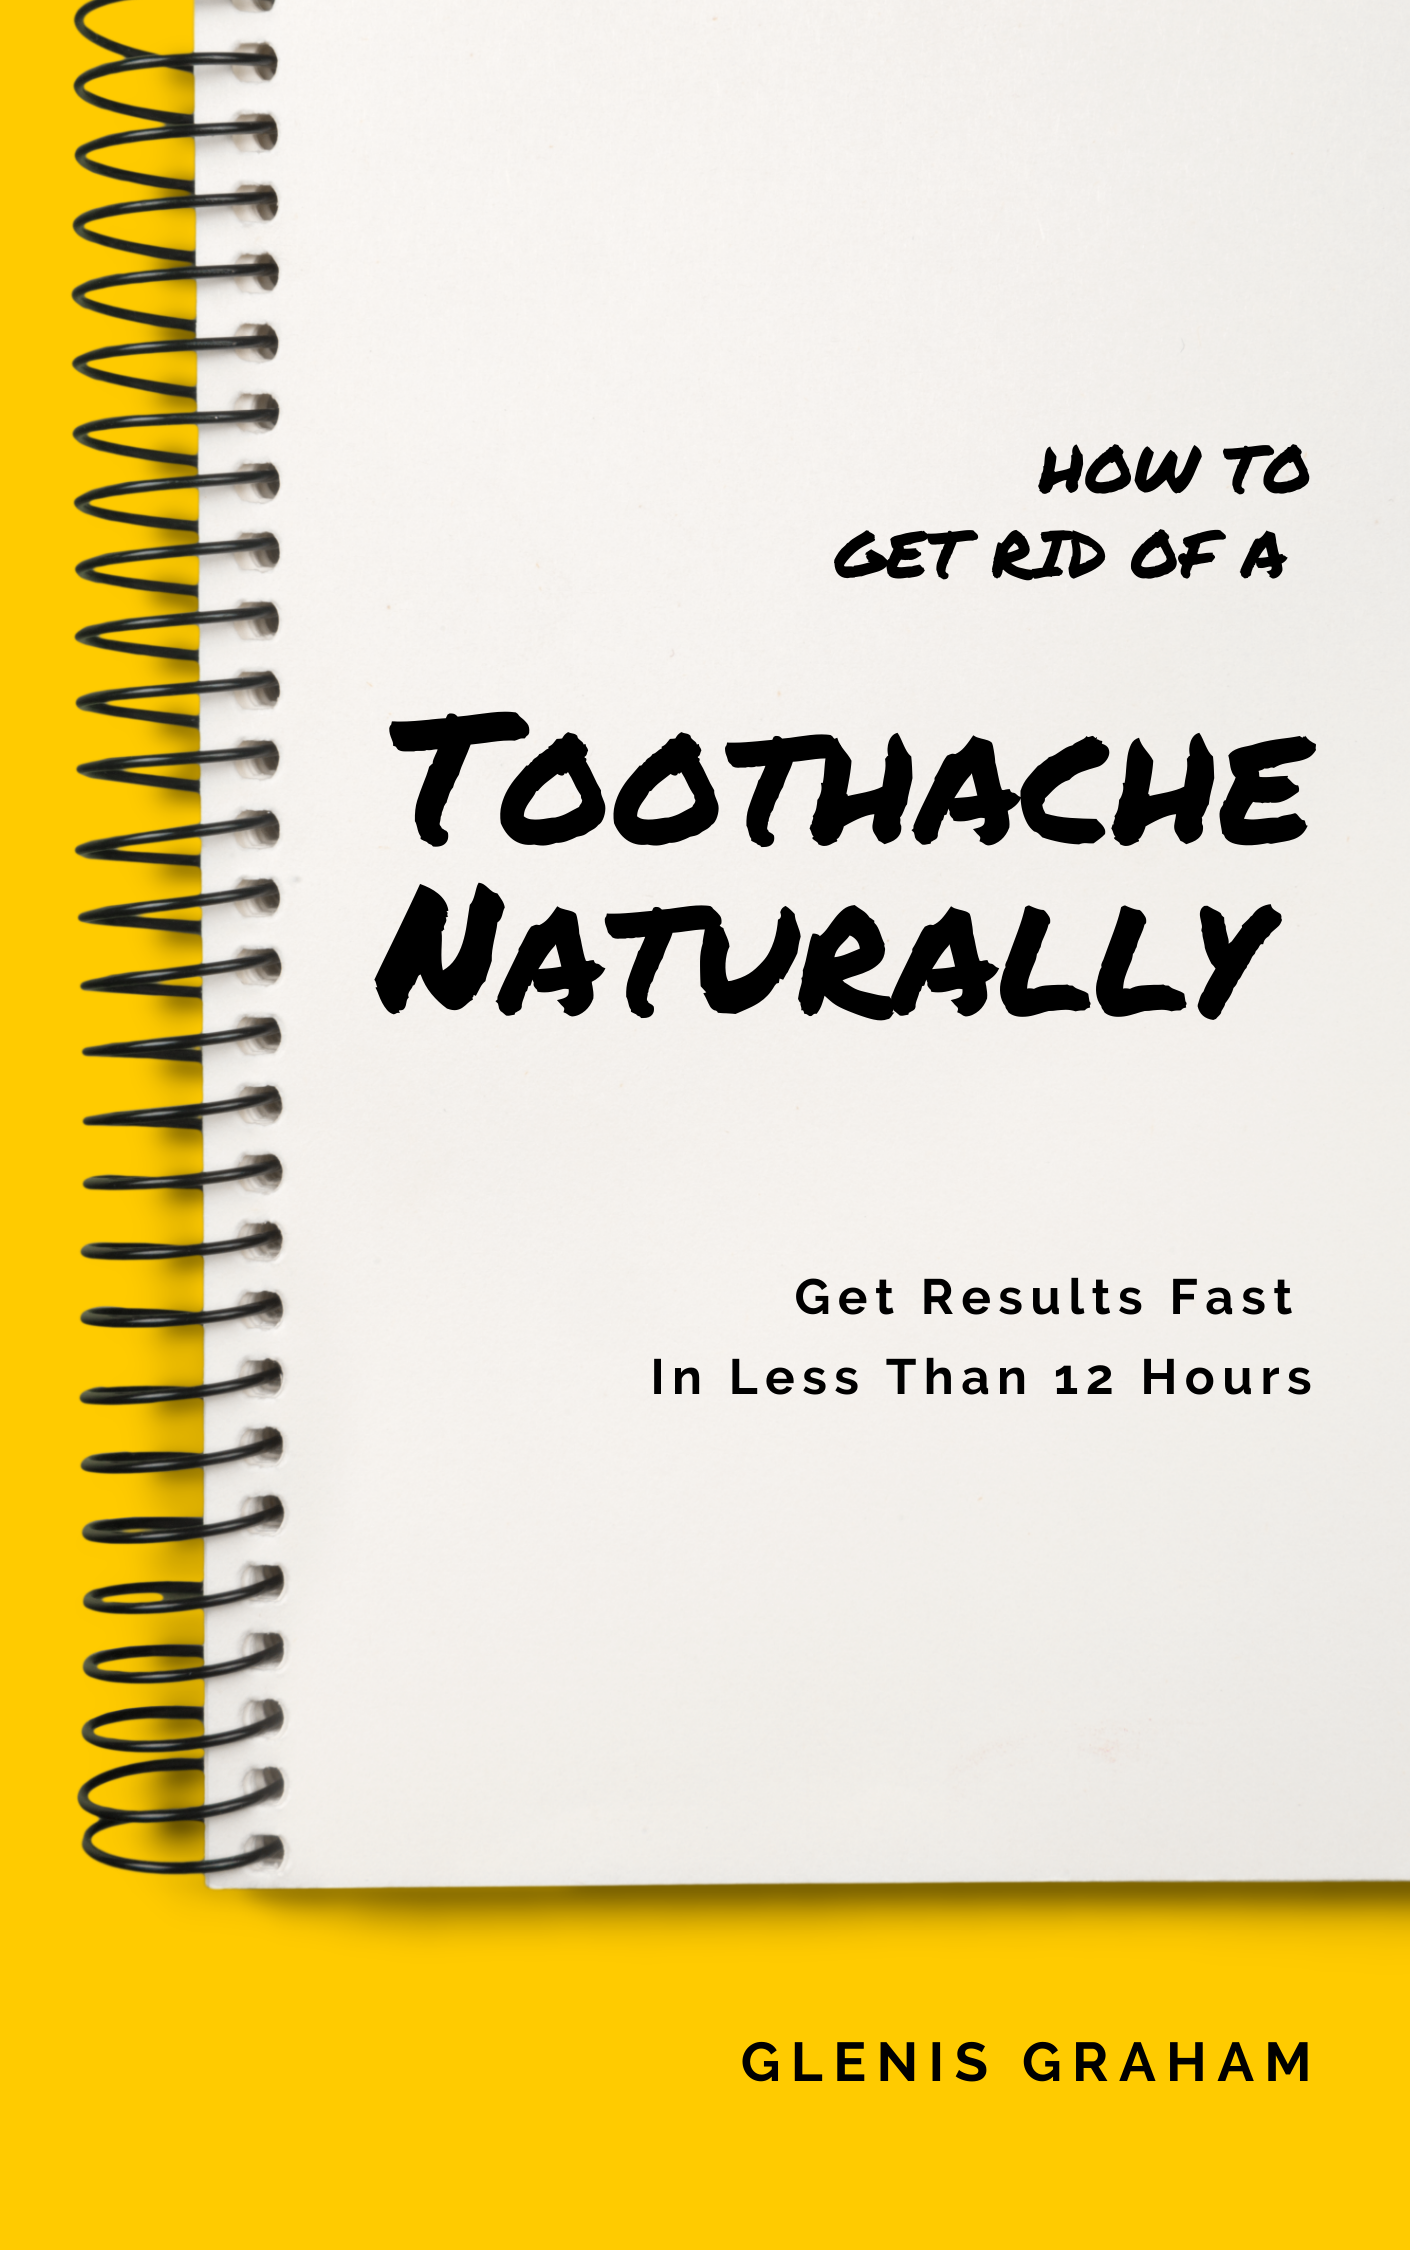 Toothache Naturally